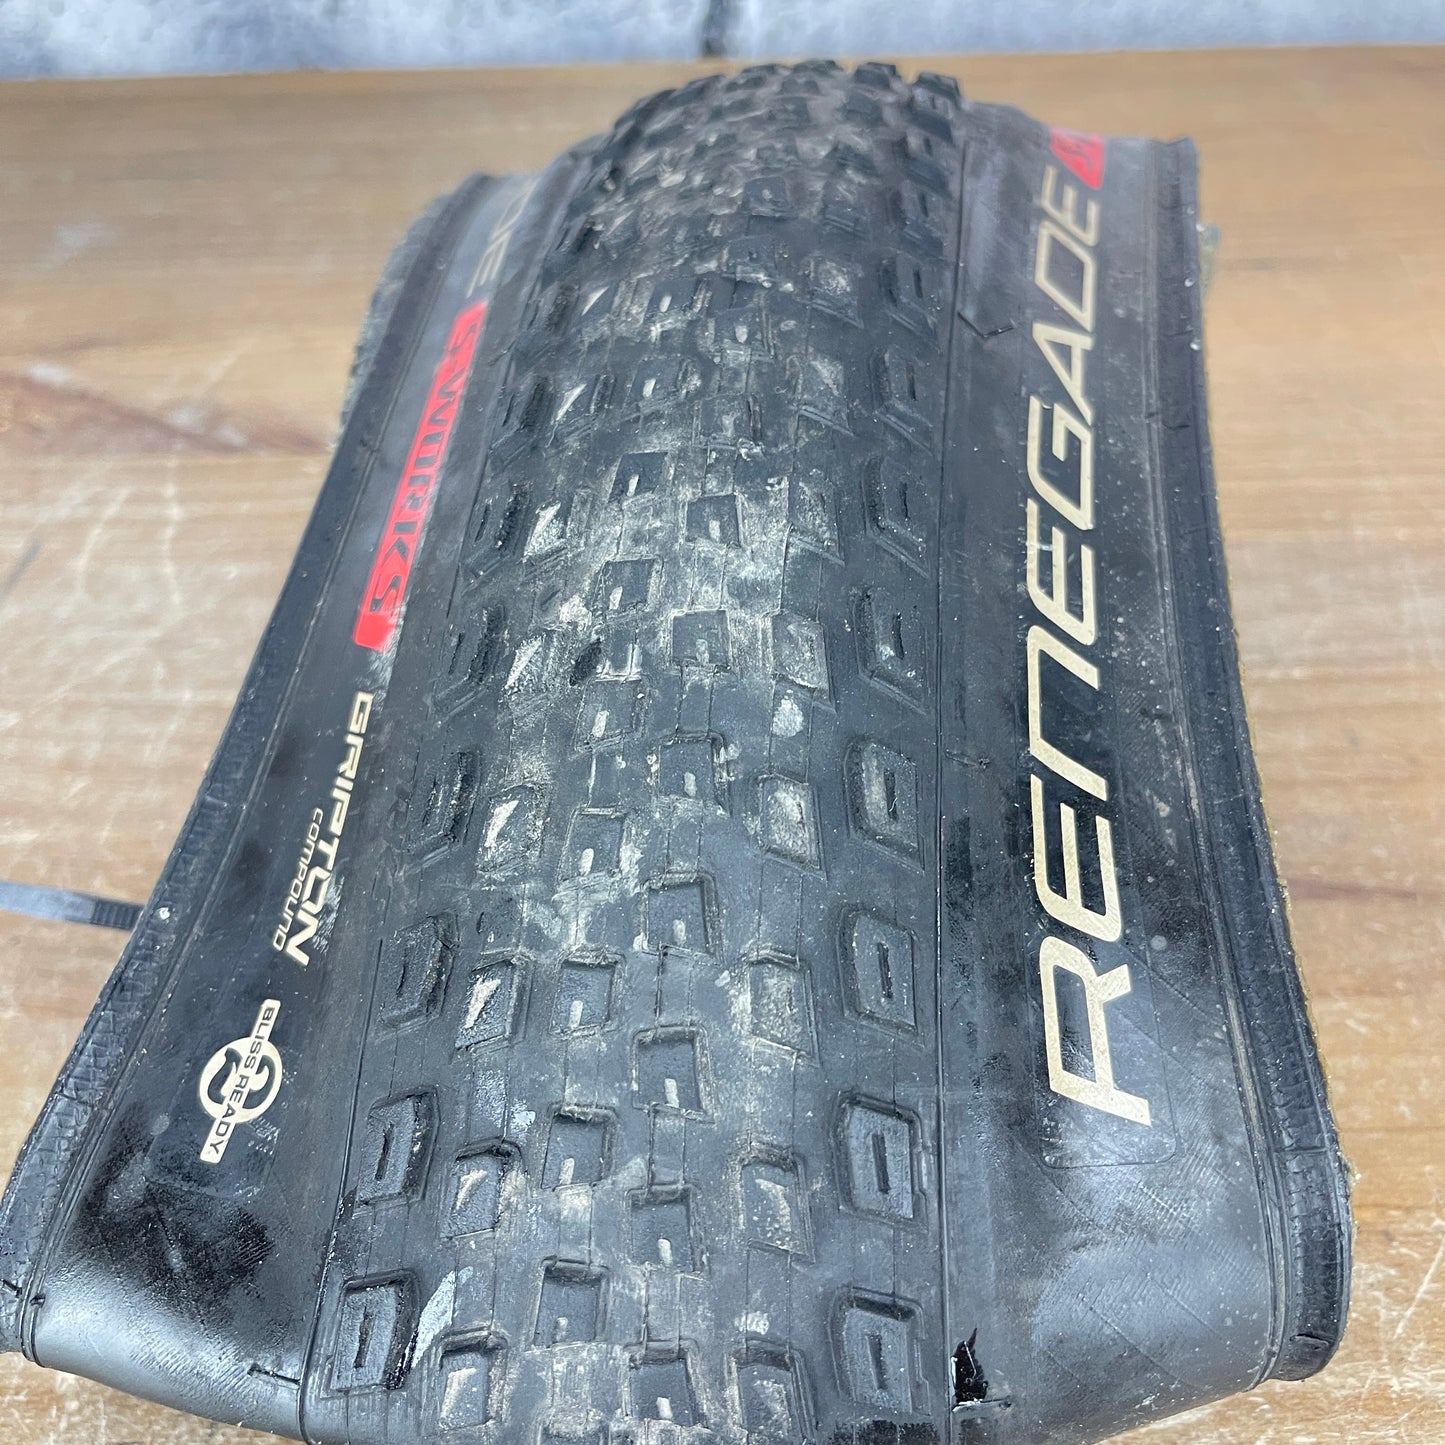 Specialized S-works Renegade 29" x 2.1" MTB Tubeless Single Tire